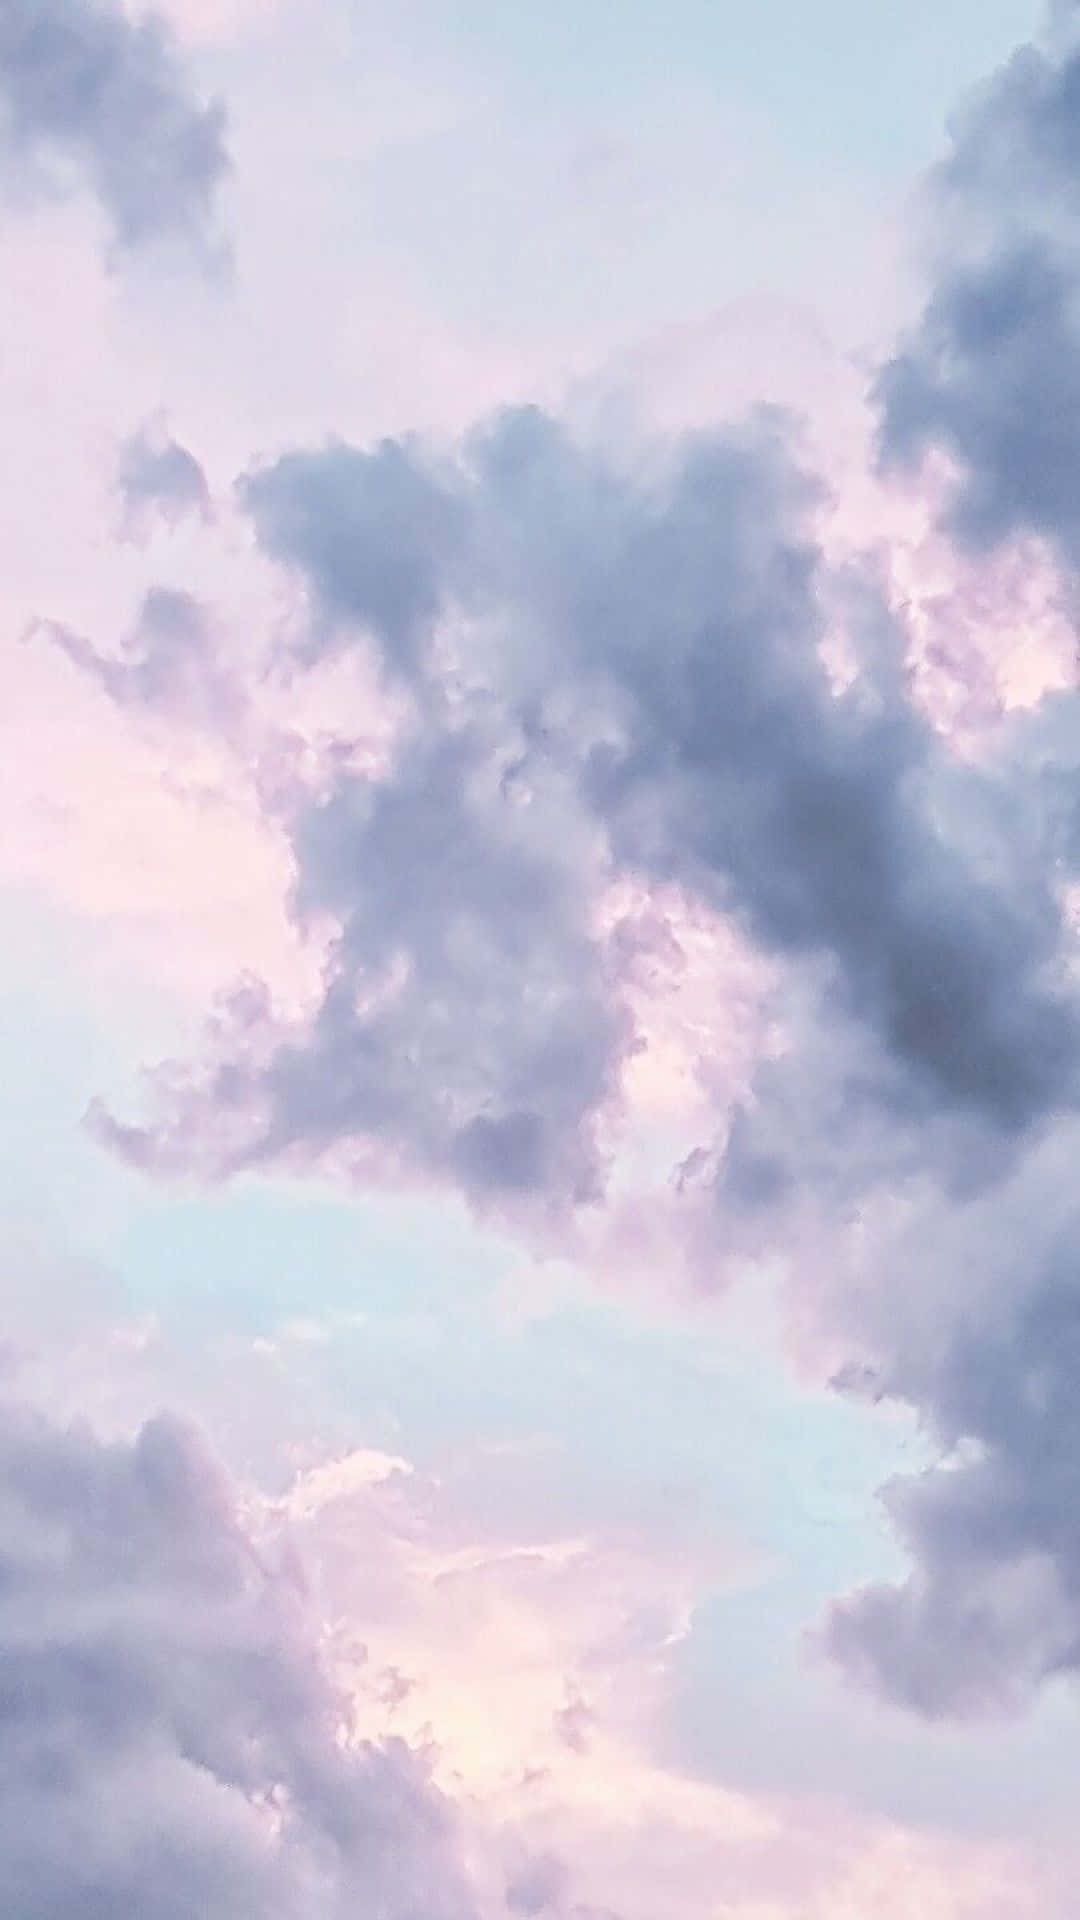 Dreamy clouds float above a brilliant sunset Wallpaper